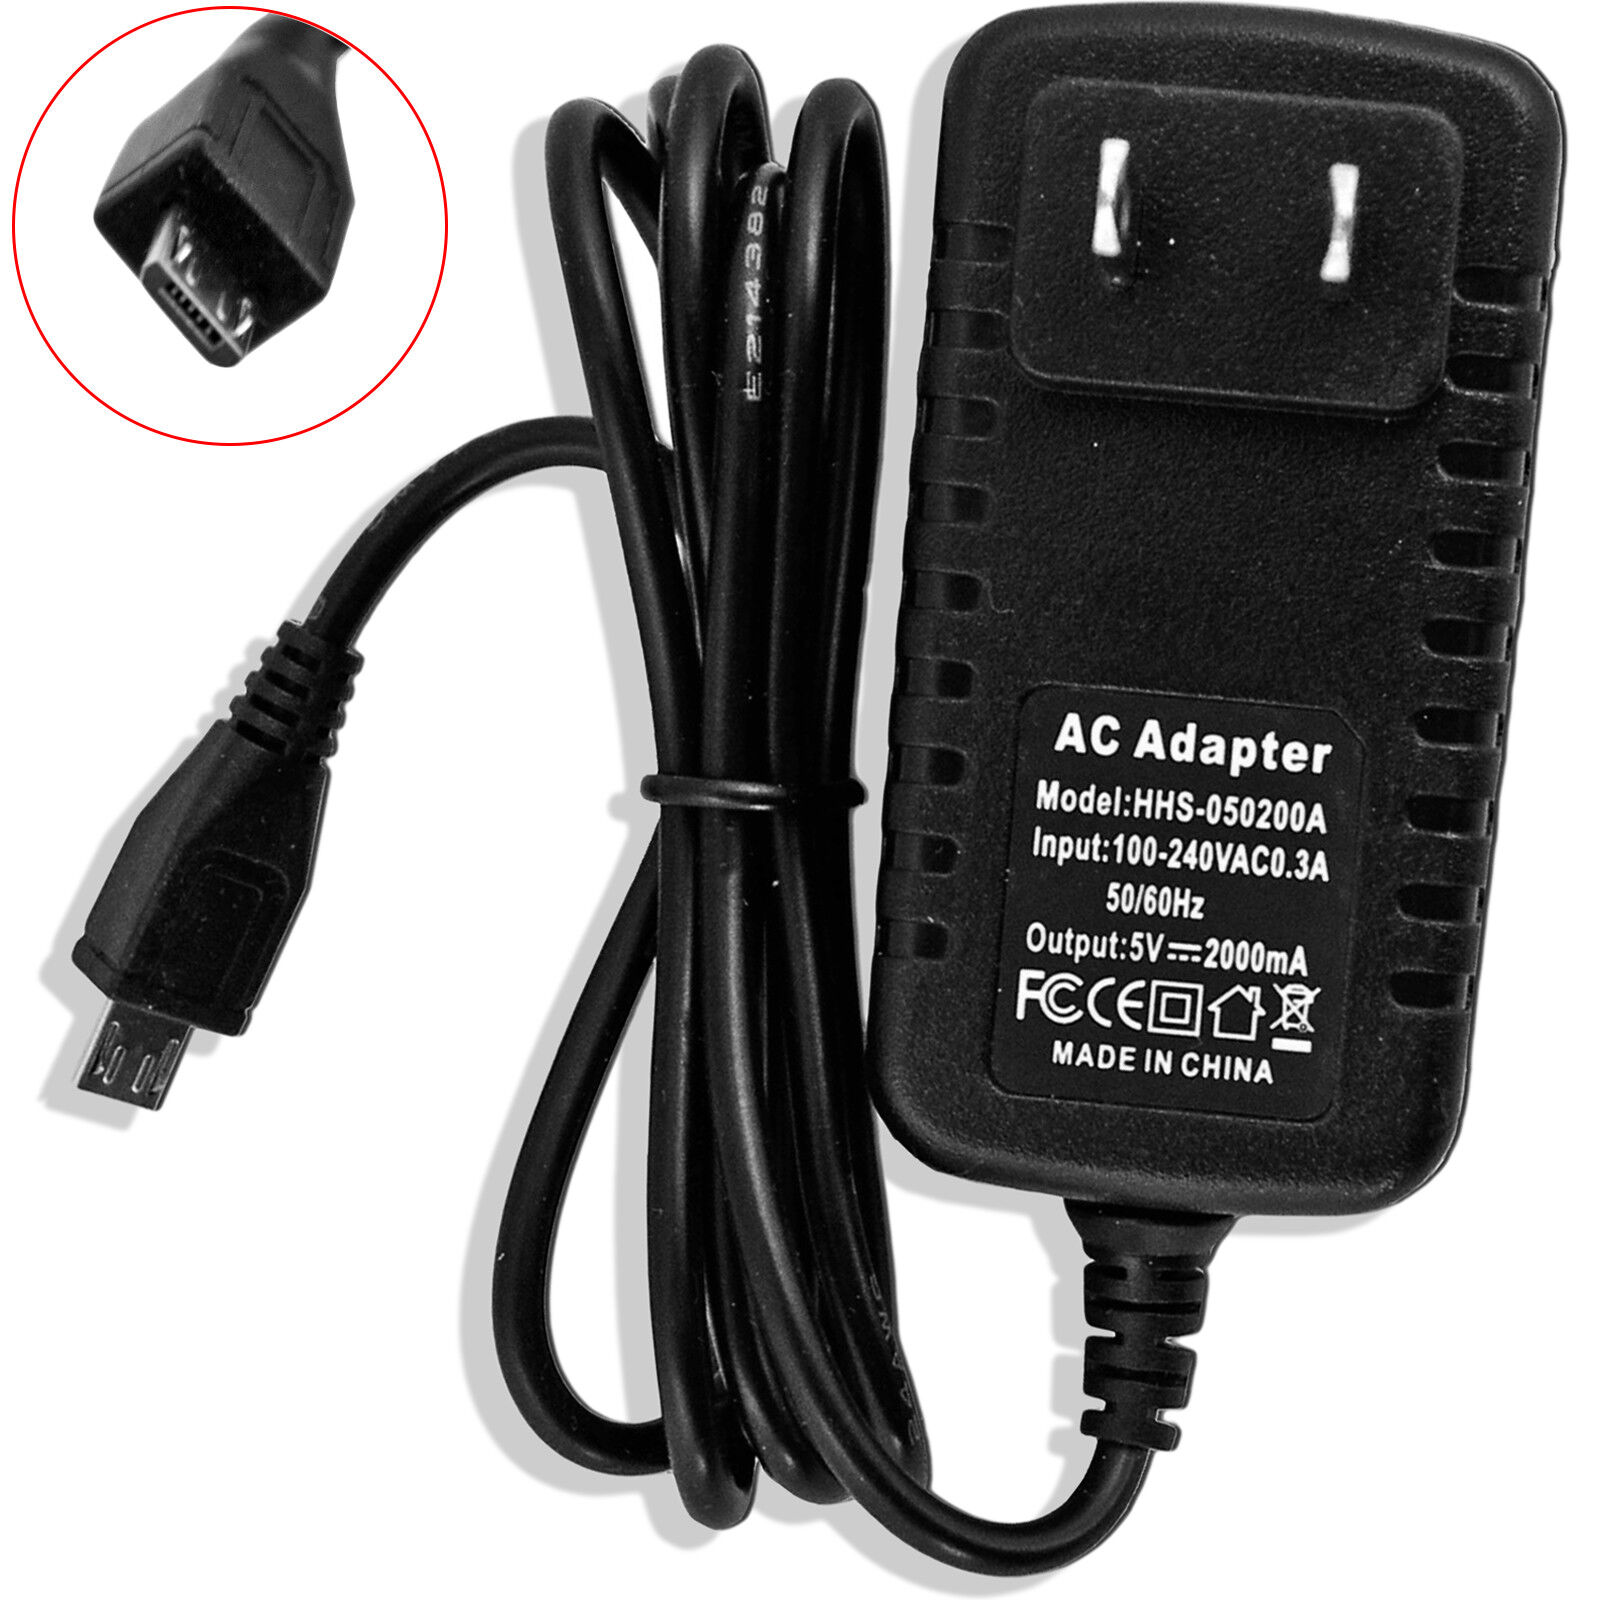 Aimilcall Micro USB AC/DC Charger Adapter Power Supply for Raspberry Pi B+ B Compatible Brand Universal Color Black It